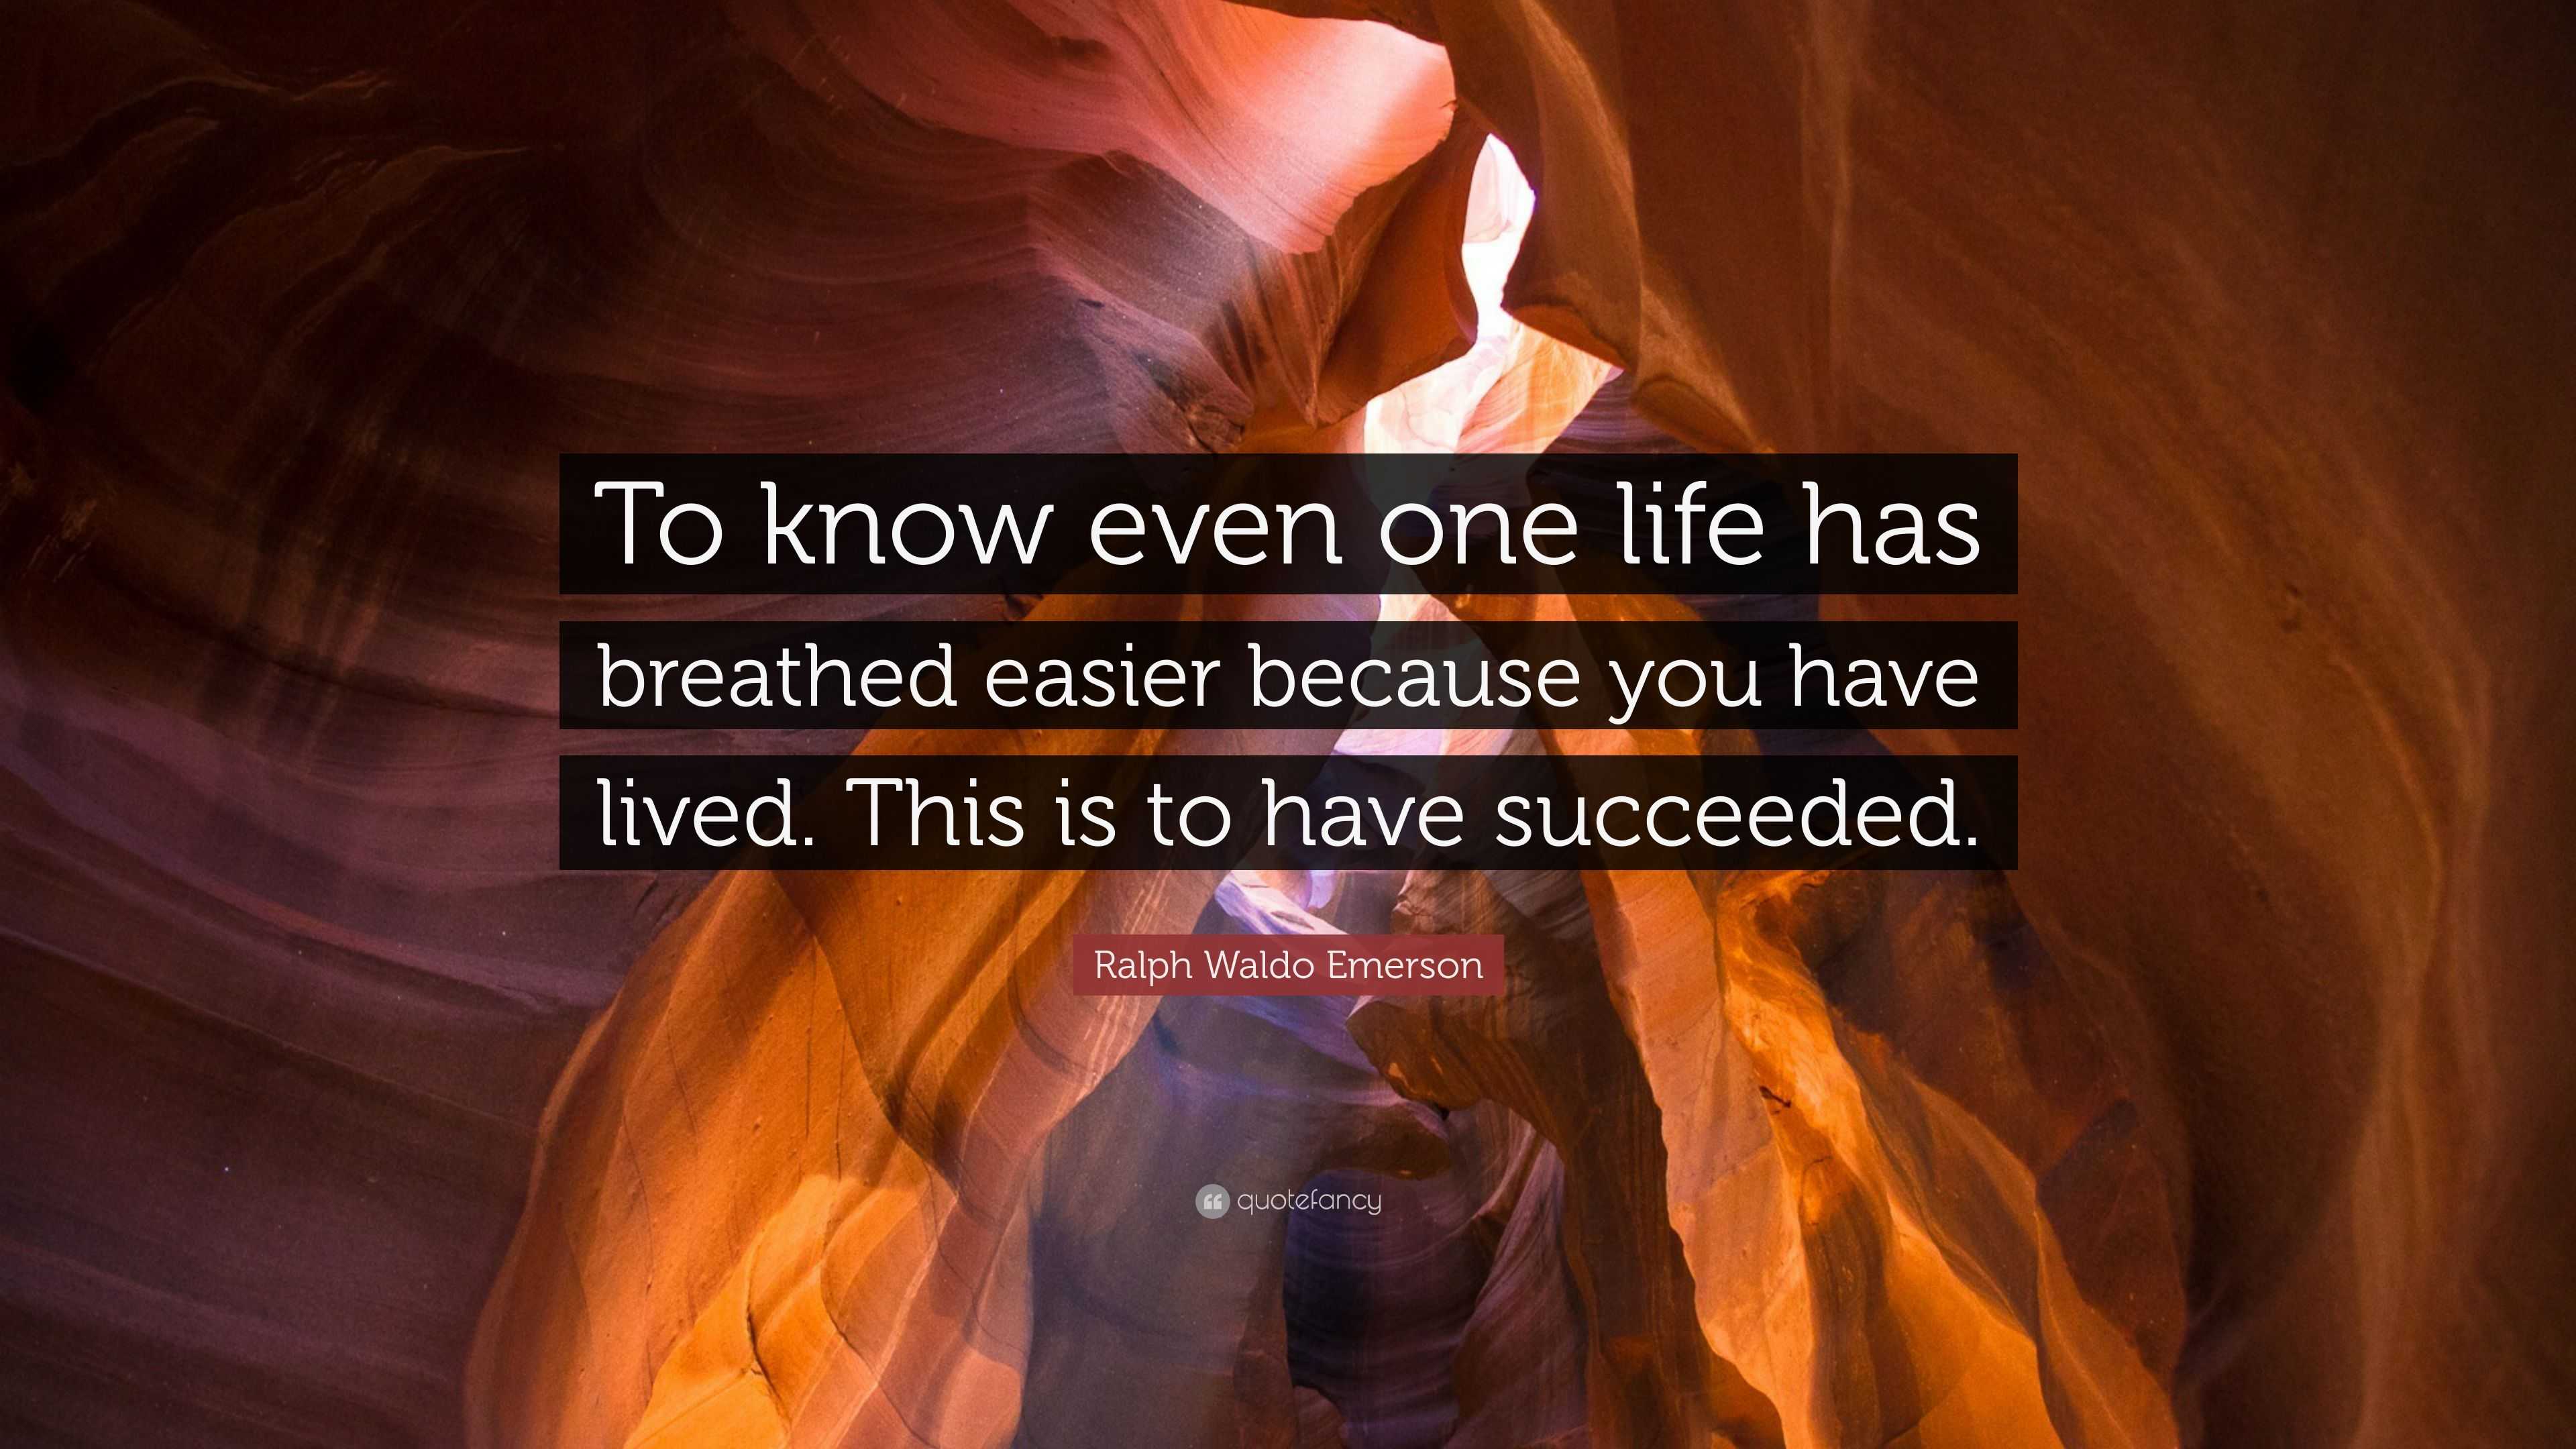 Ralph Waldo Emerson Quote: “To know even one life has breathed easier